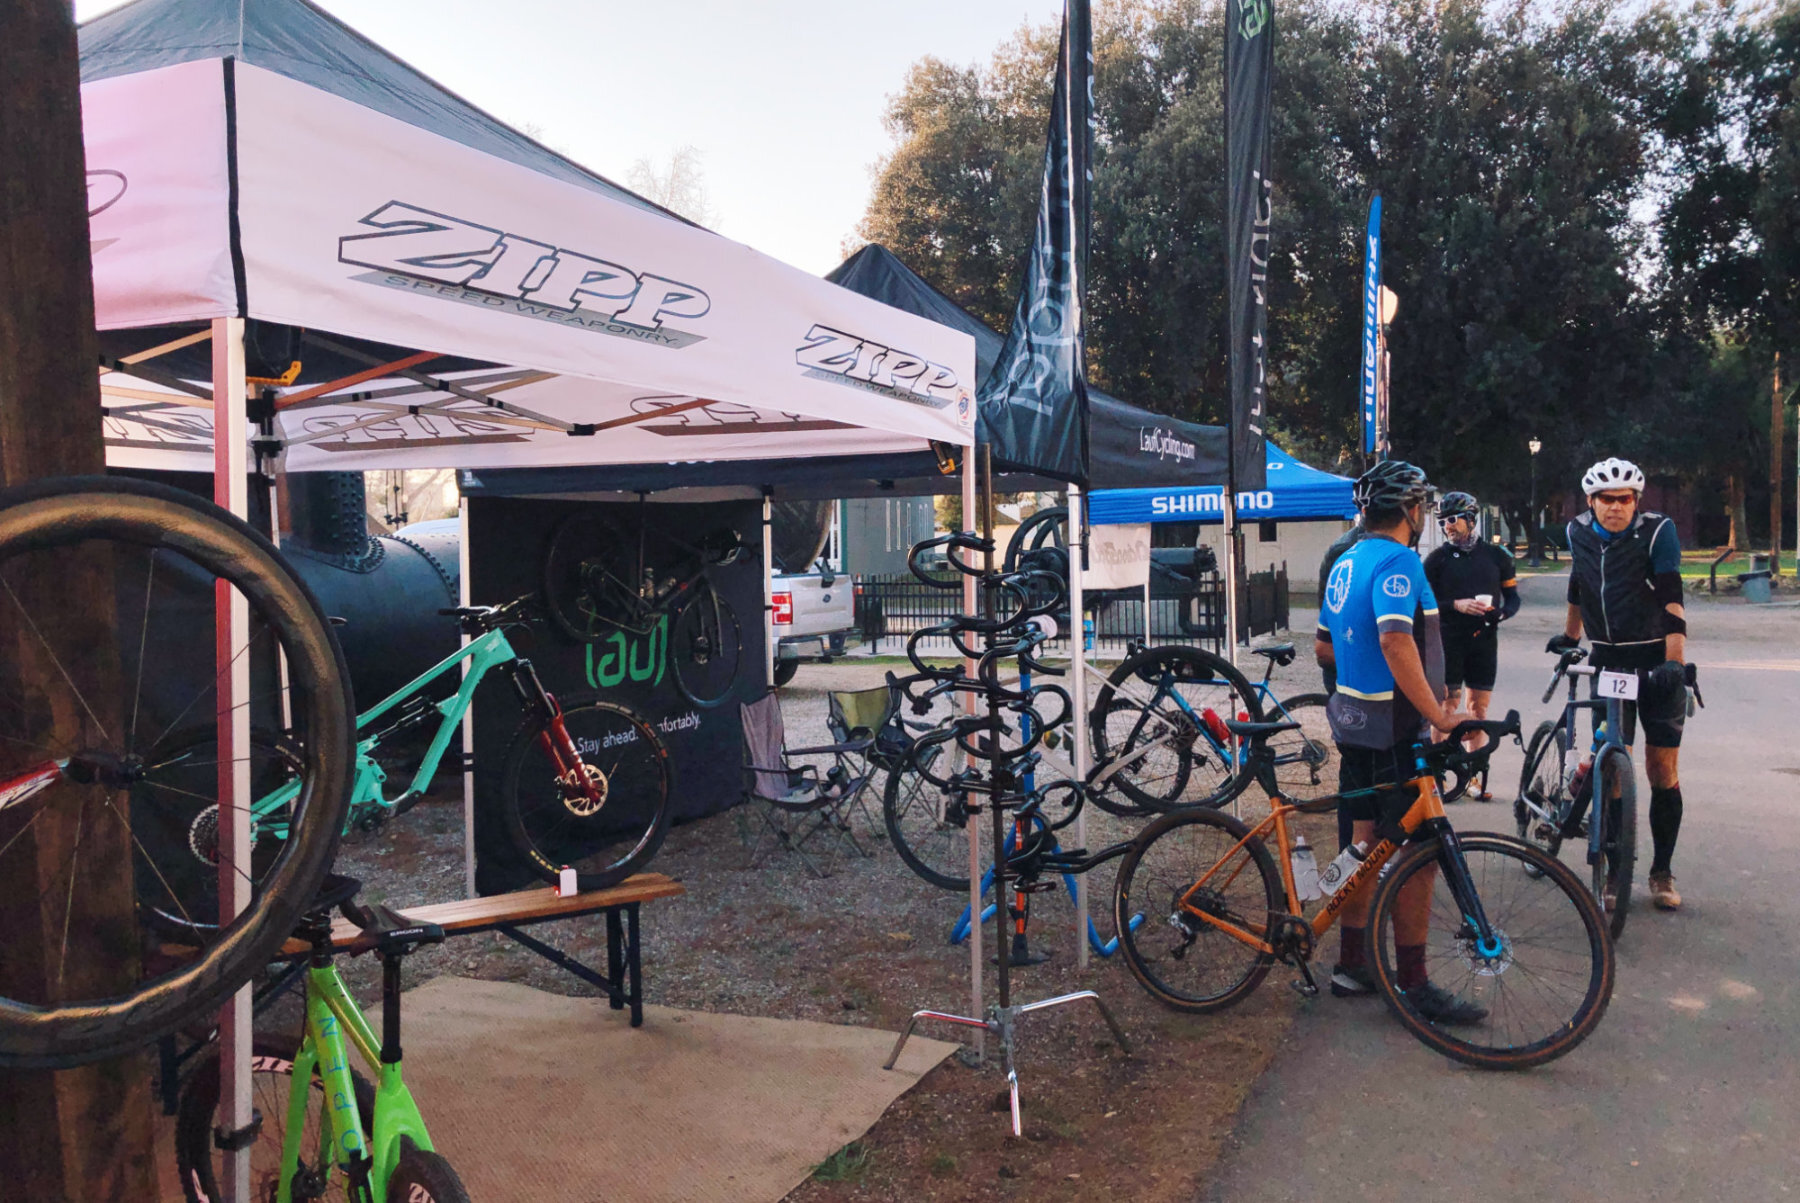  The expo area also included tents from SRAM, Zipp and Lauf Cycling.  